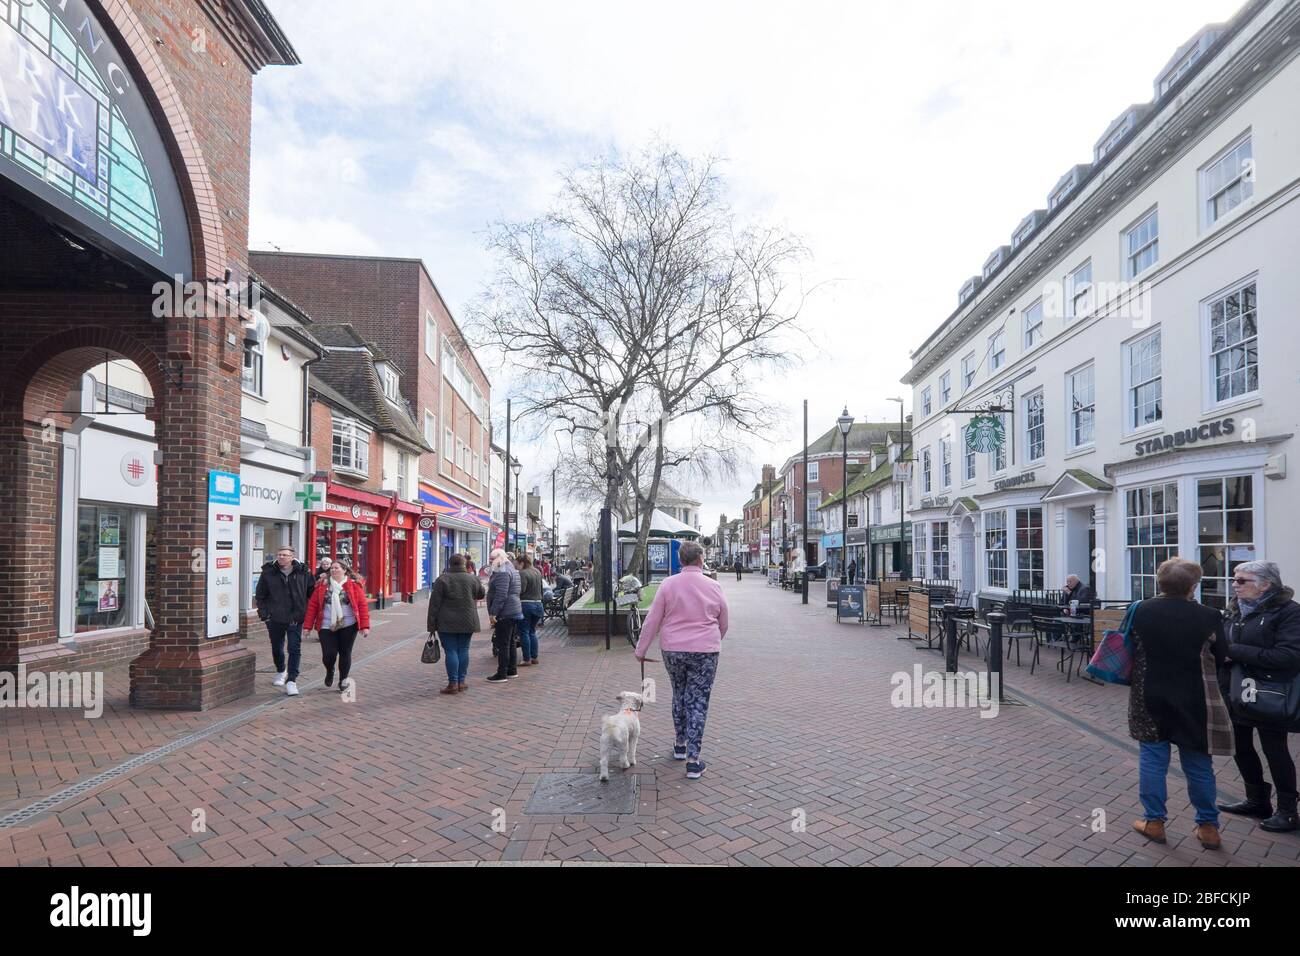 Ashford, Kent, United Kingdom - March 9, 2020: People walking and chatting on High Street in the pedestrianised town centre with shops Stock Photo